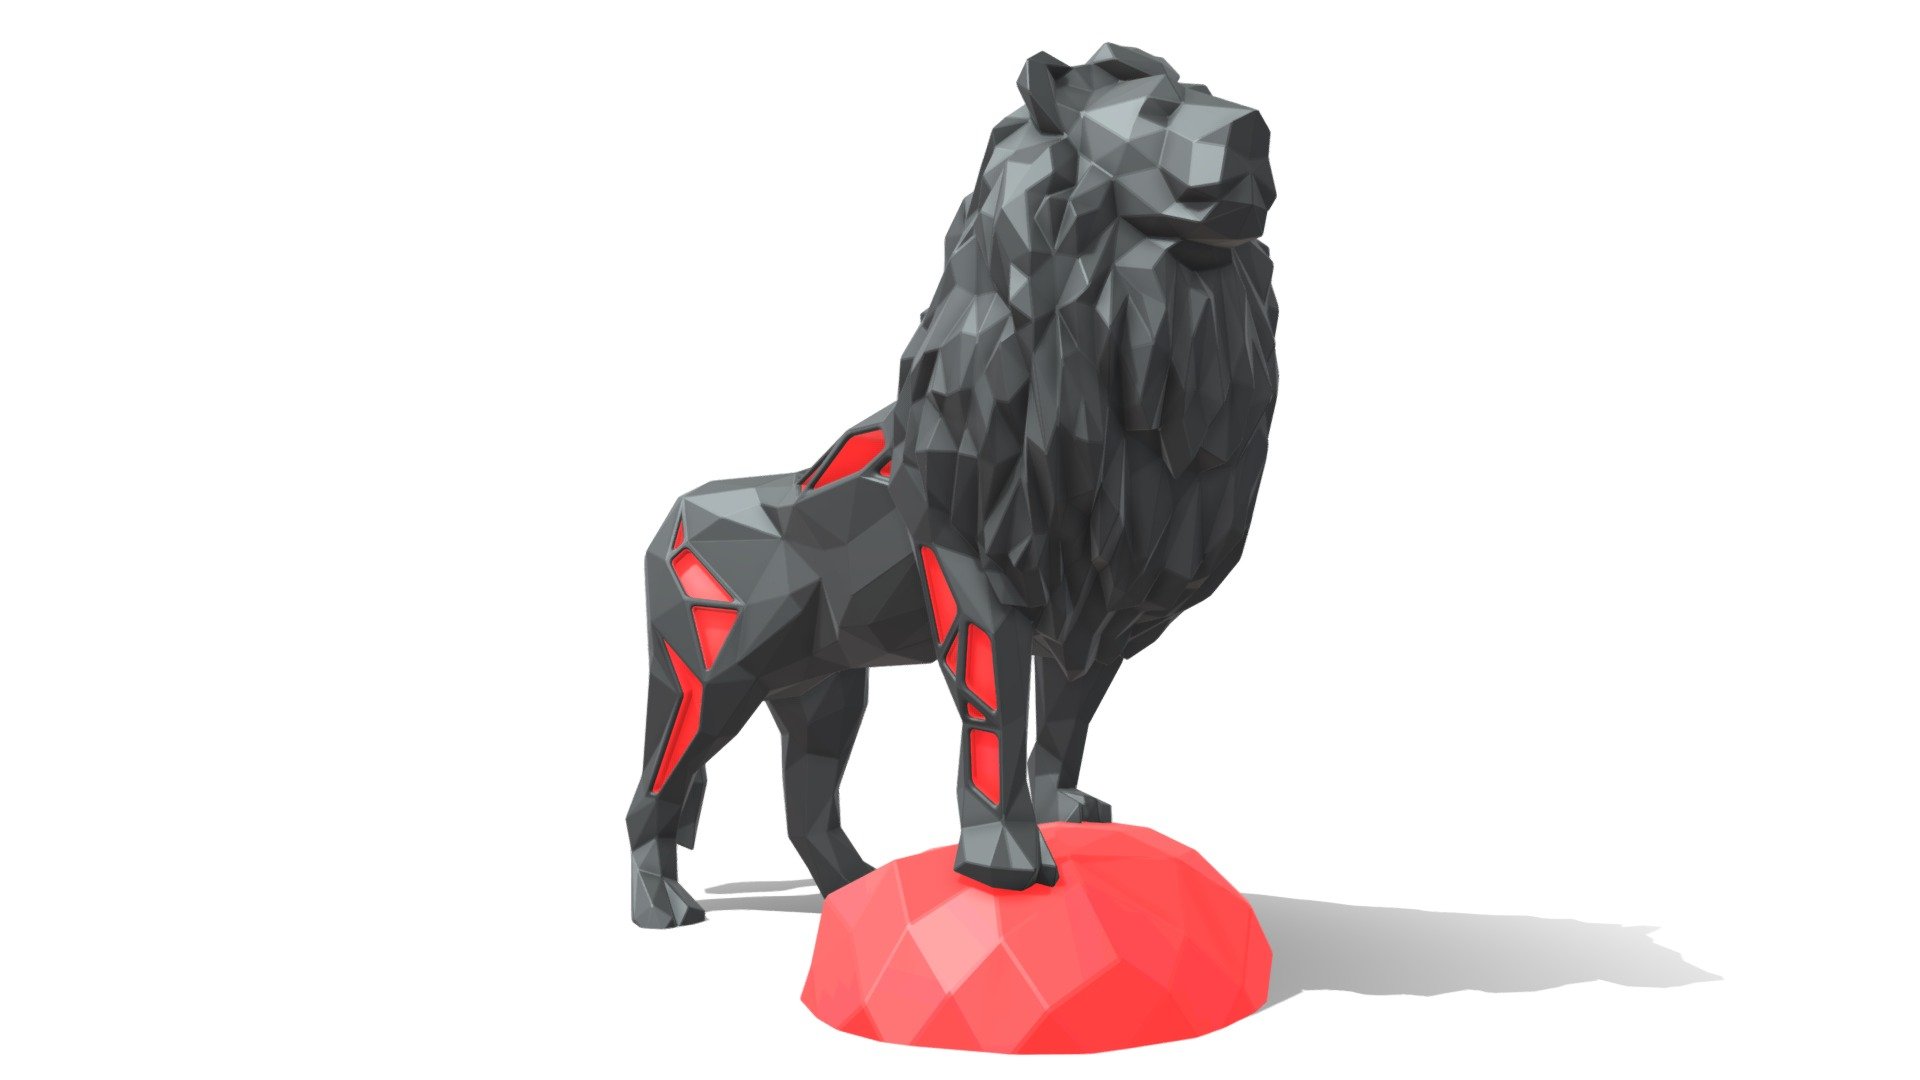 Polygonal 3D Model with Voronoi Style modeling with gold material, make it recommend for :


Basic modeling 
Rigging 
sculpting 
Become Statue
Decorate
3D Print File
Toy

Have fun  :) - Voronoi Poly Lion Rock - Buy Royalty Free 3D model by Puppy3D 3d model